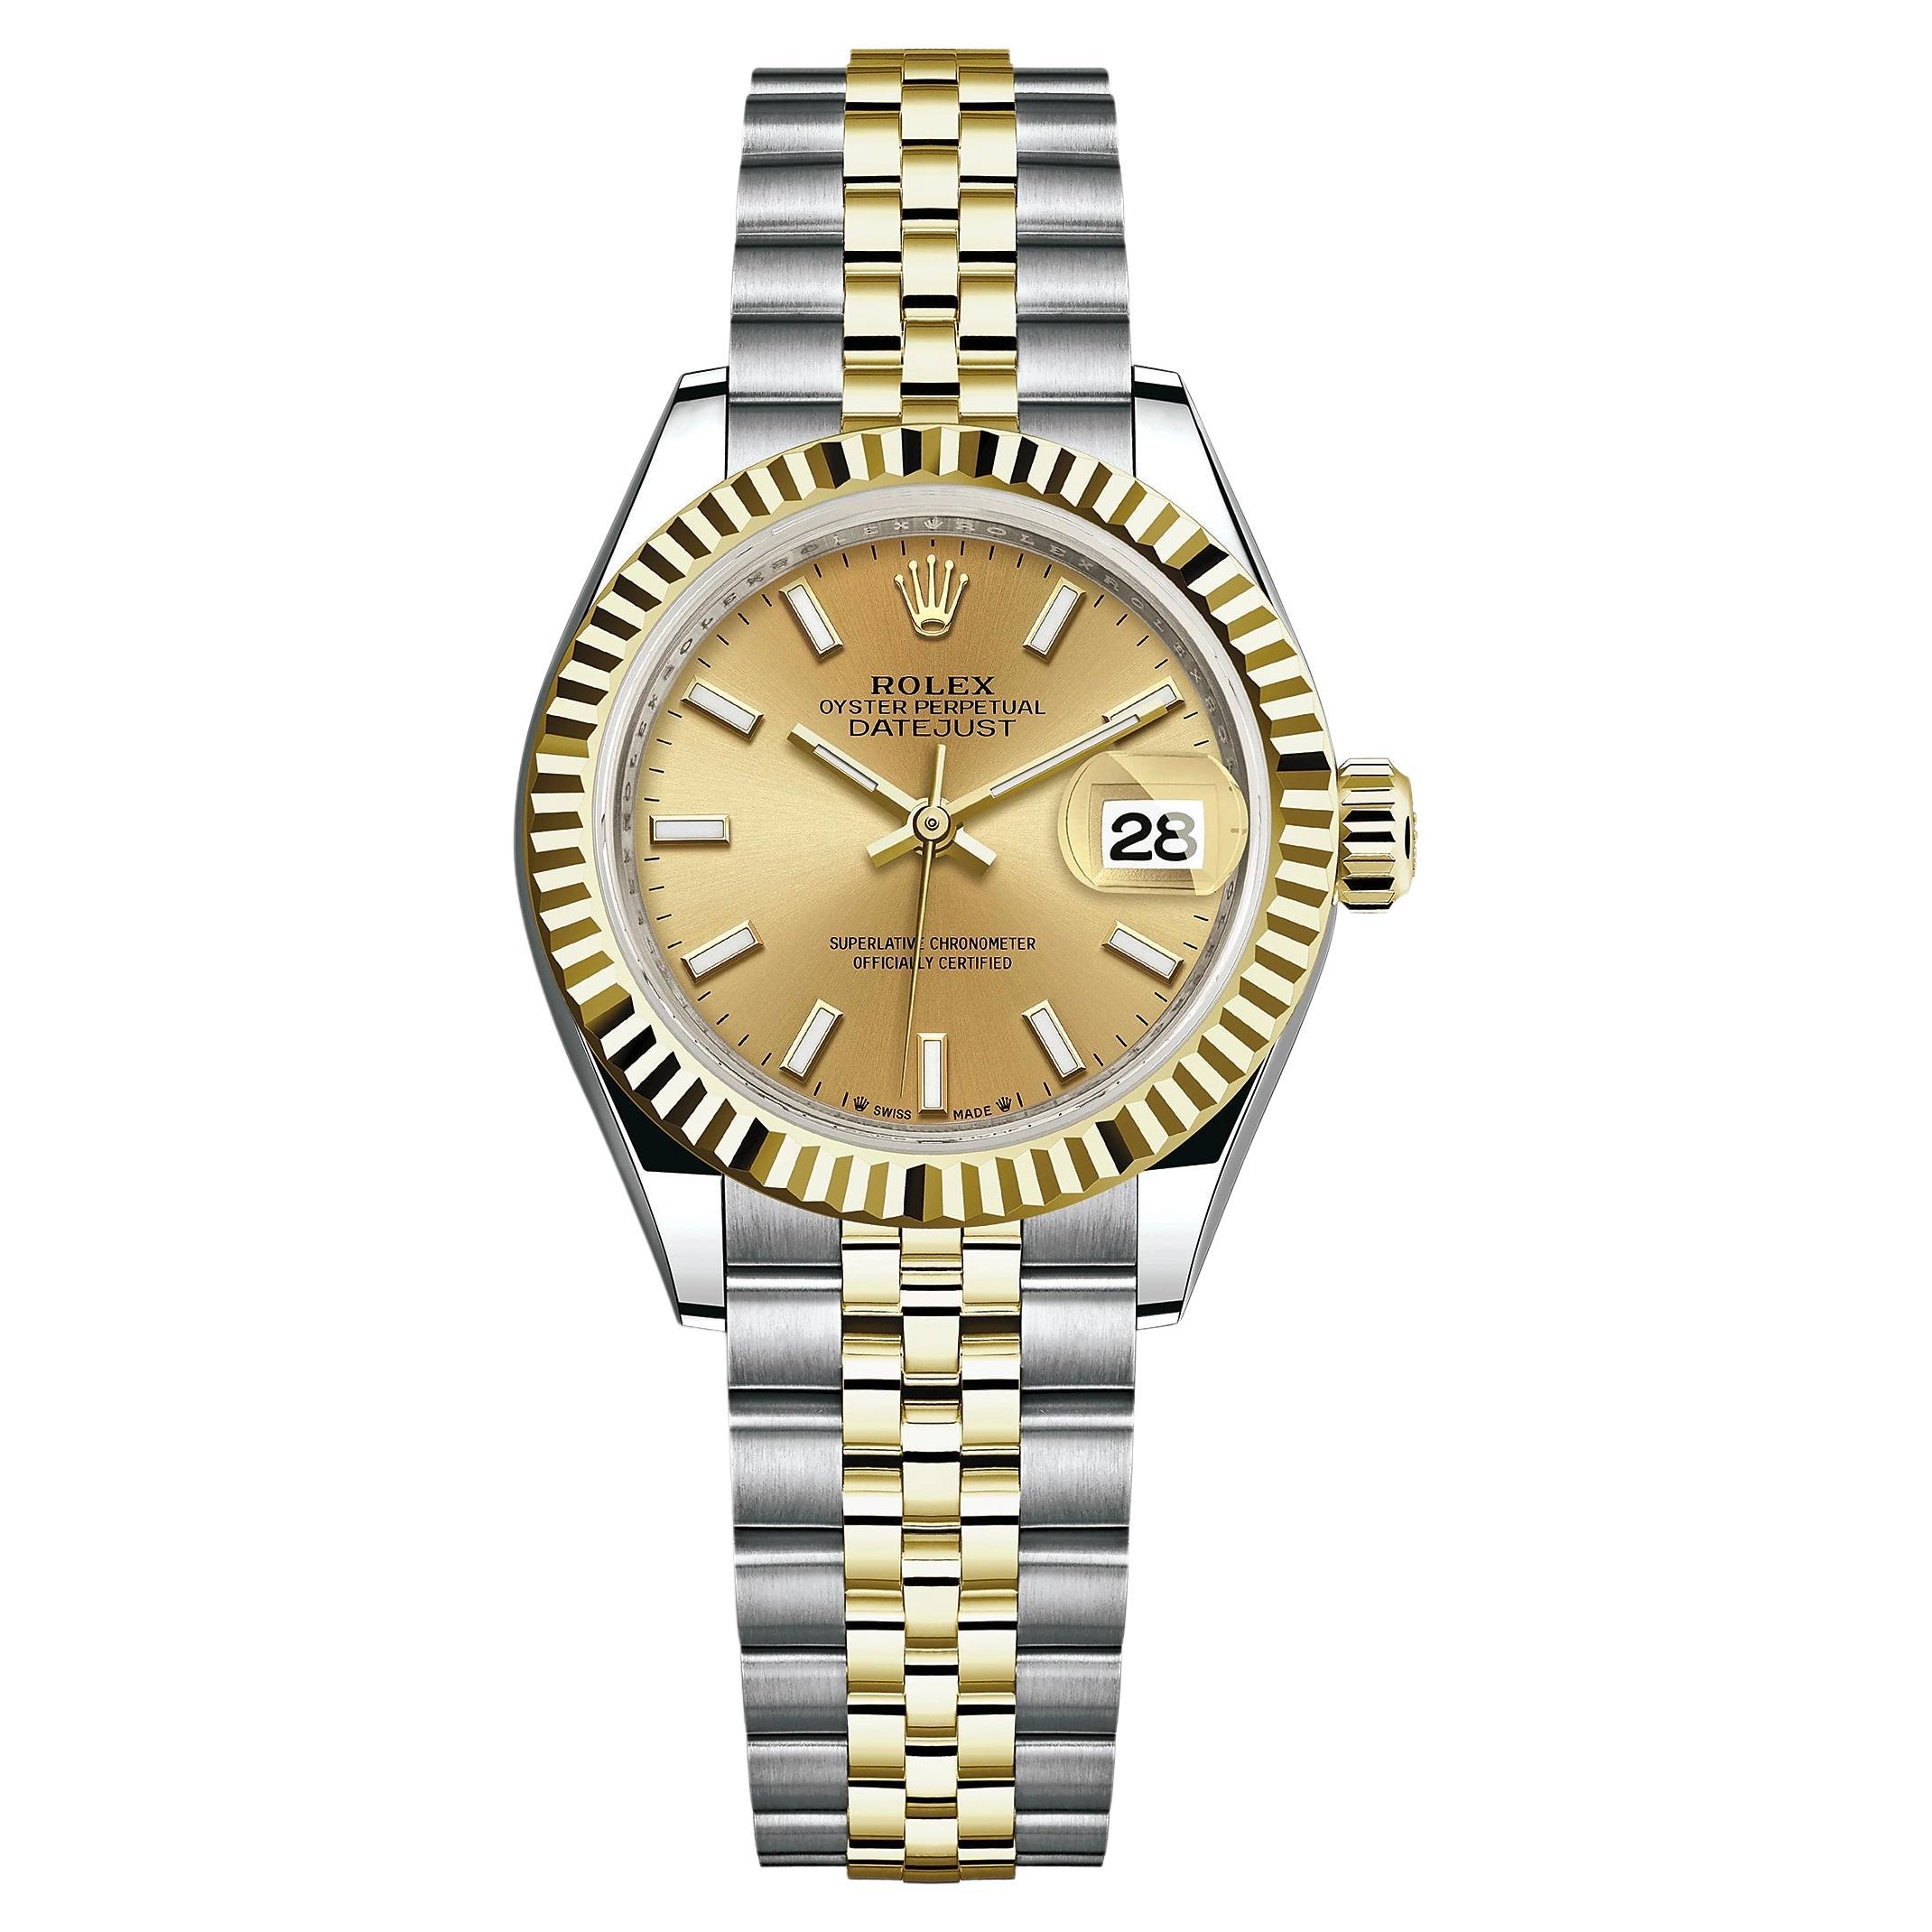 Rolex Lady Datejust, Champagne, Jubilee, Fluted, 279173, Unworn Watch, Complete For Sale